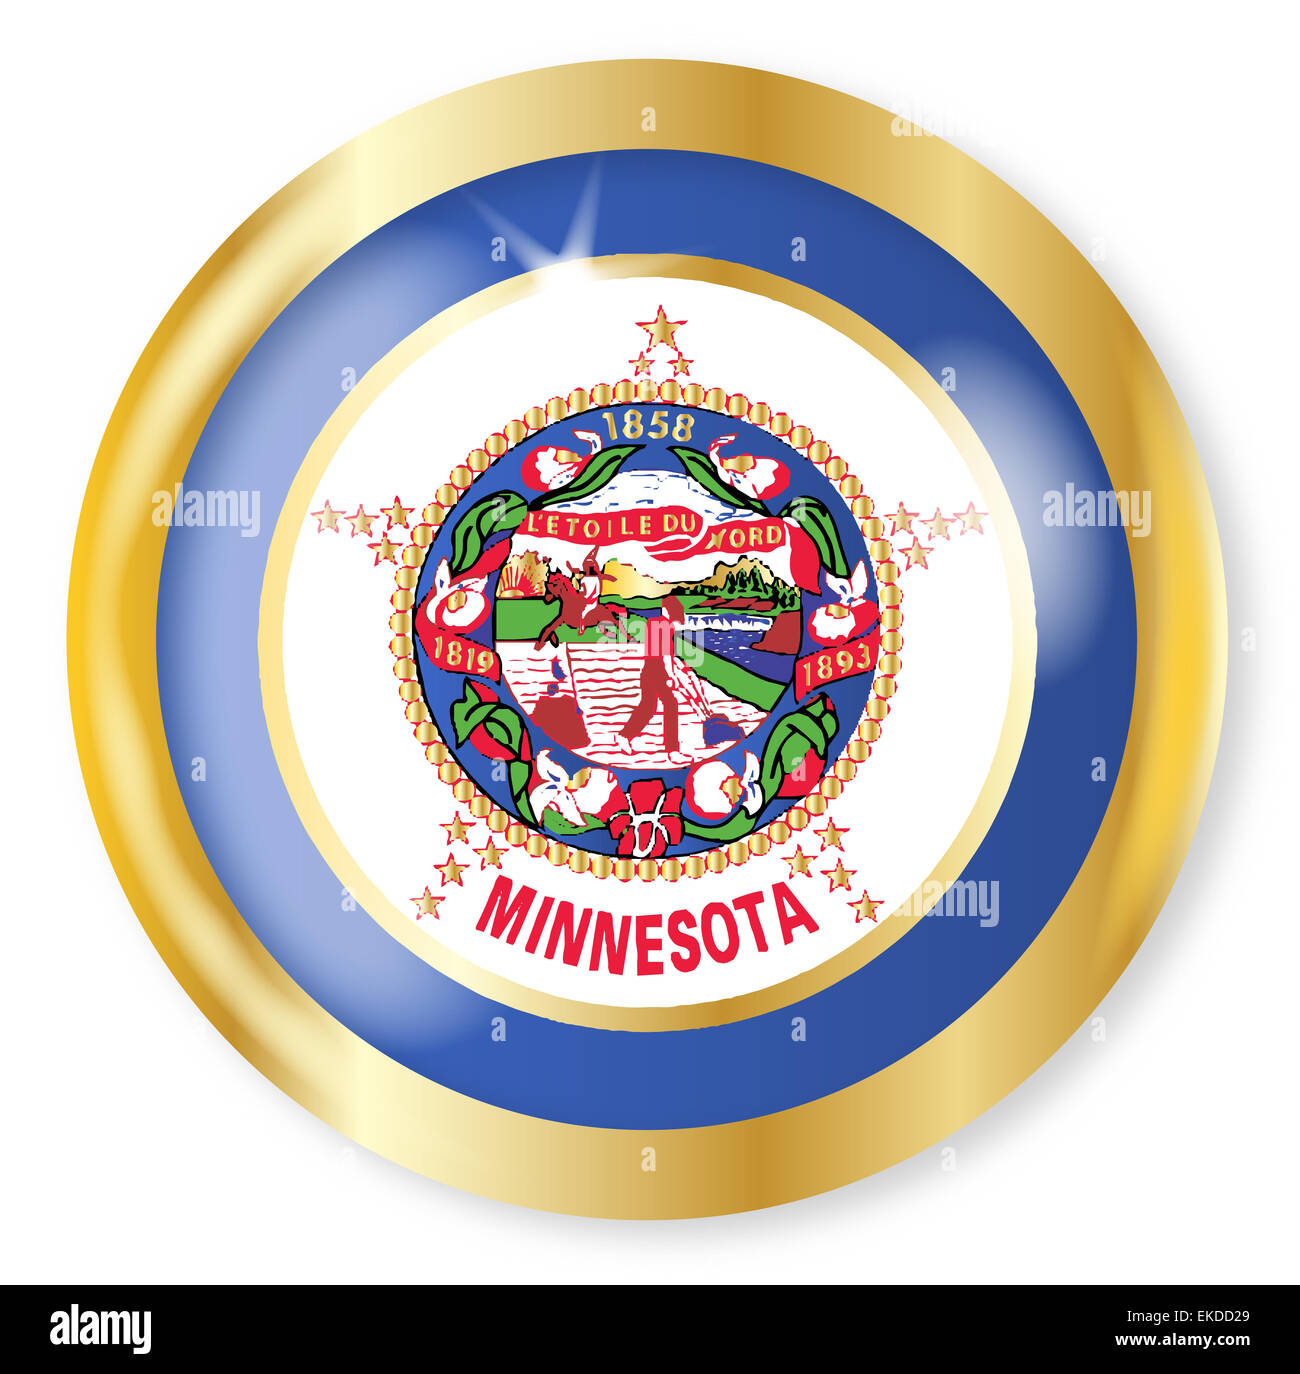 Minnesota state flag button with a gold metal circular border over a white background Stock Photo